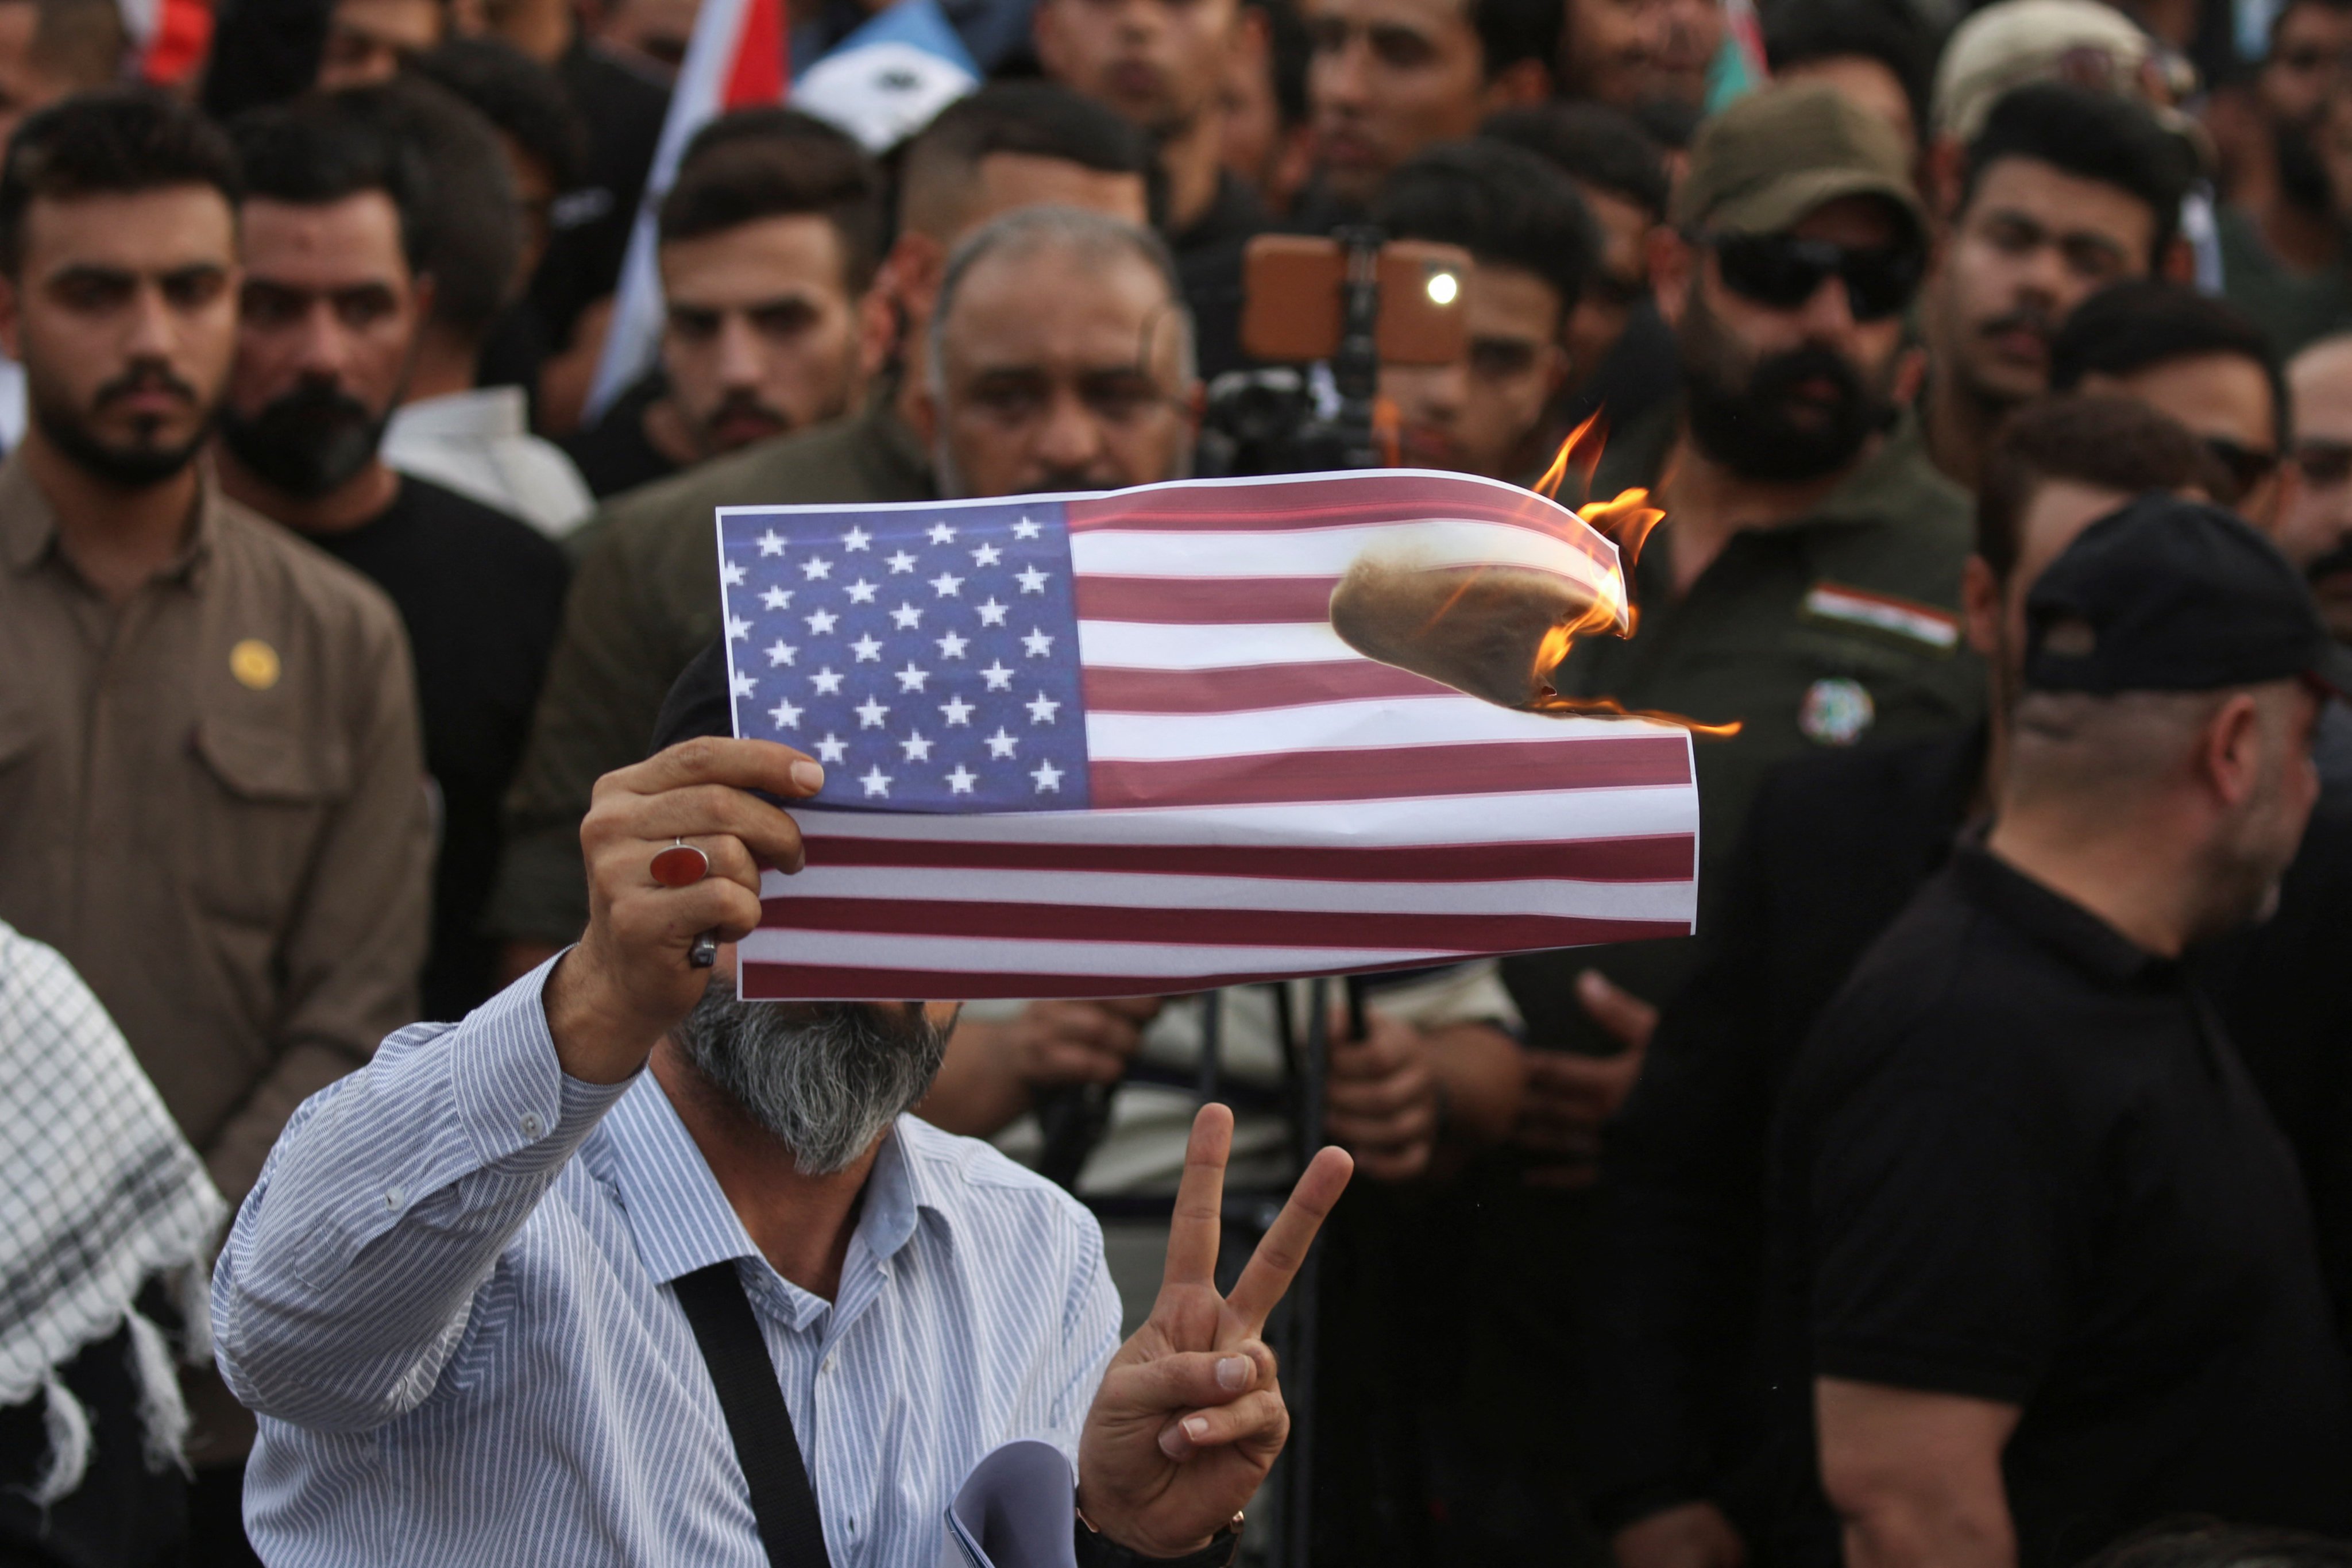 A demonstrator burns a copy of an American flag, as supporters of Iraqi Shi’ite armed groups gather to protest against the US for supporting Israel, and in support of Palestinians in Gaza. Photo: Reuters